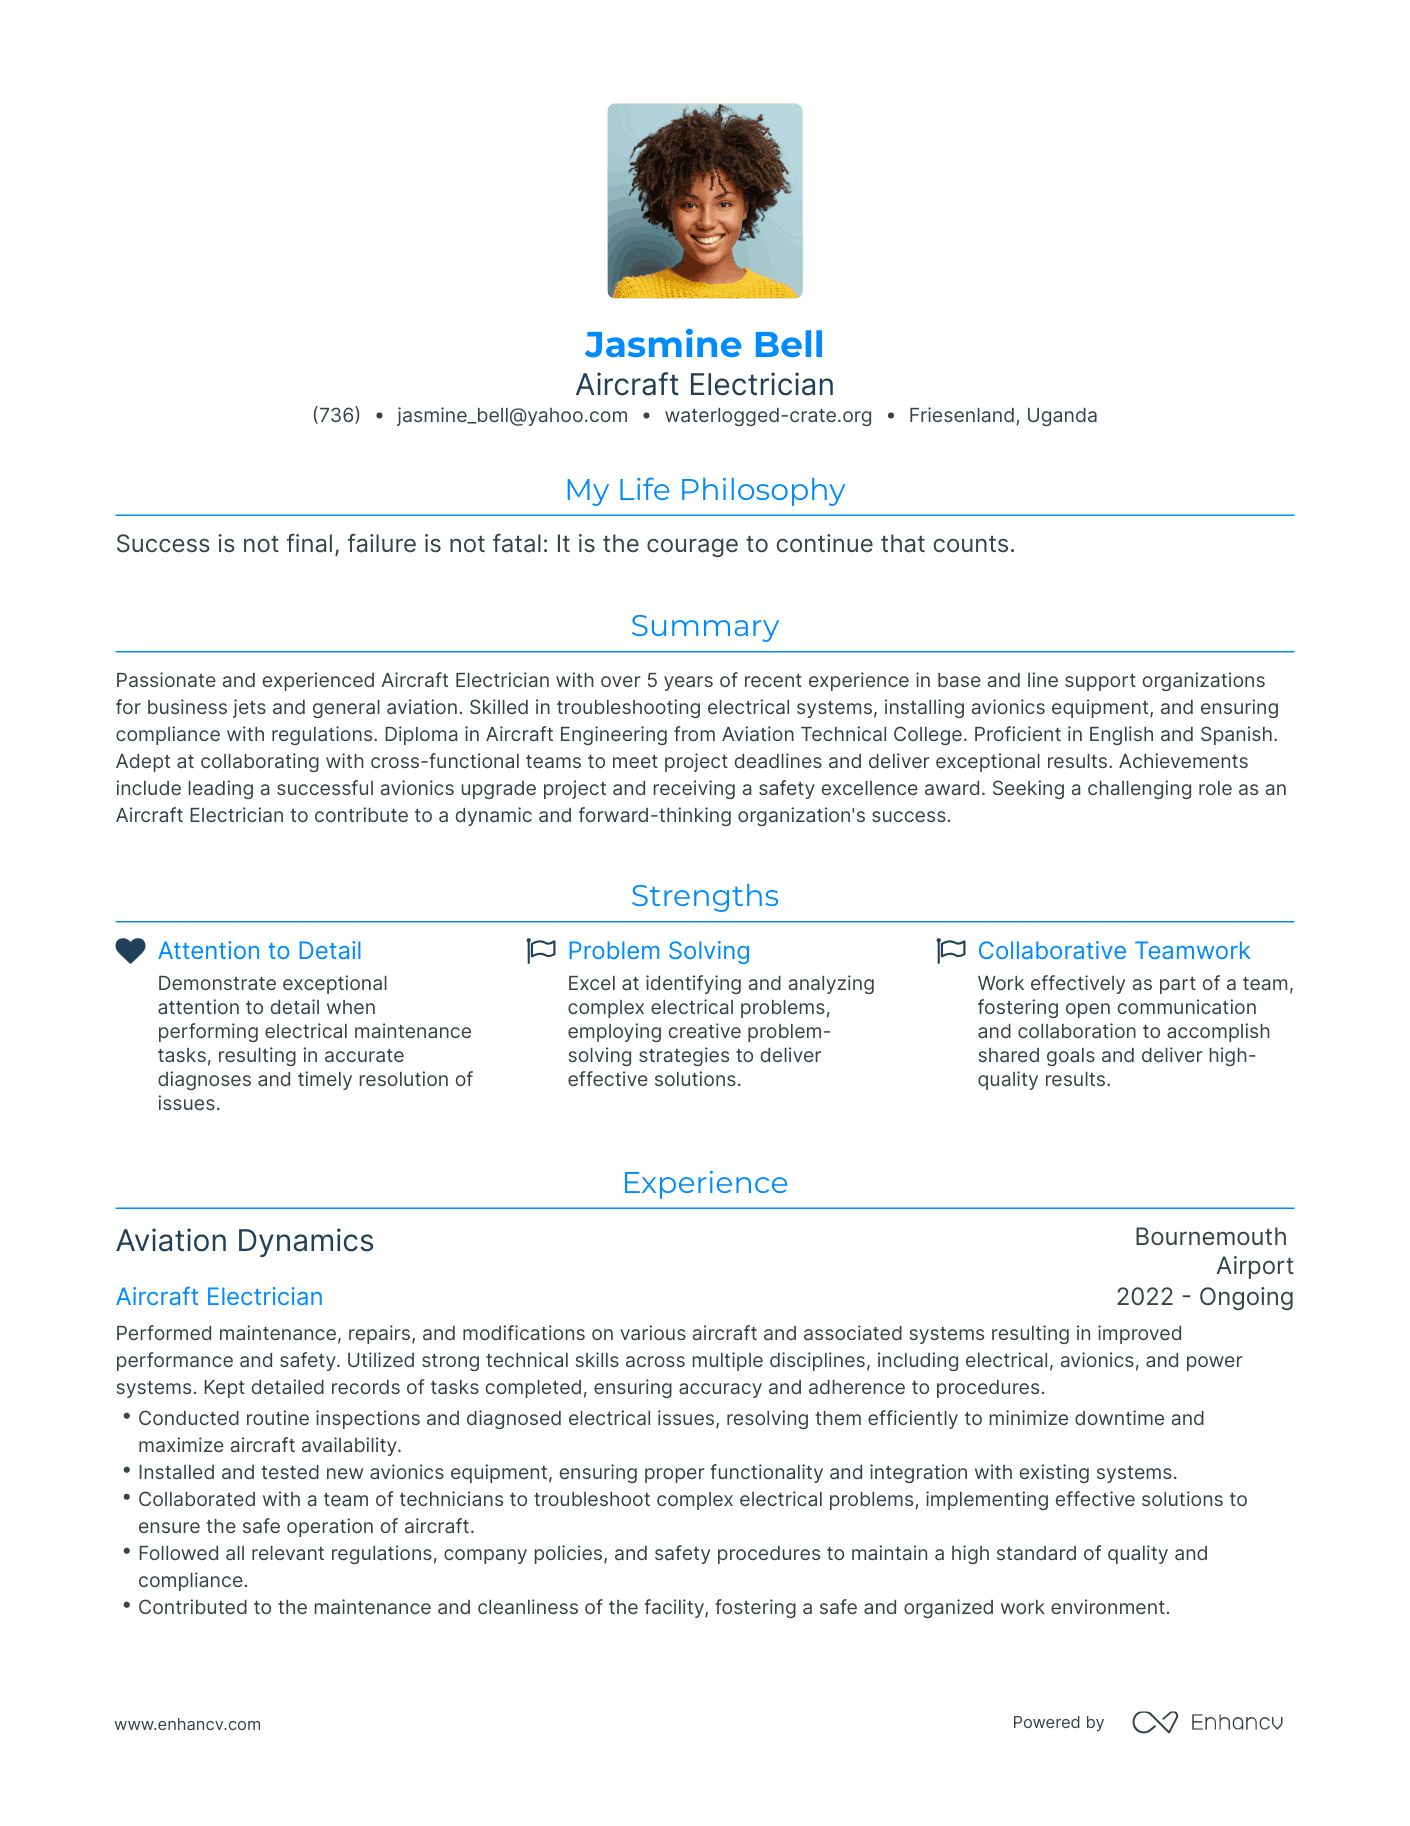 Modern Aircraft Electrician Resume Example